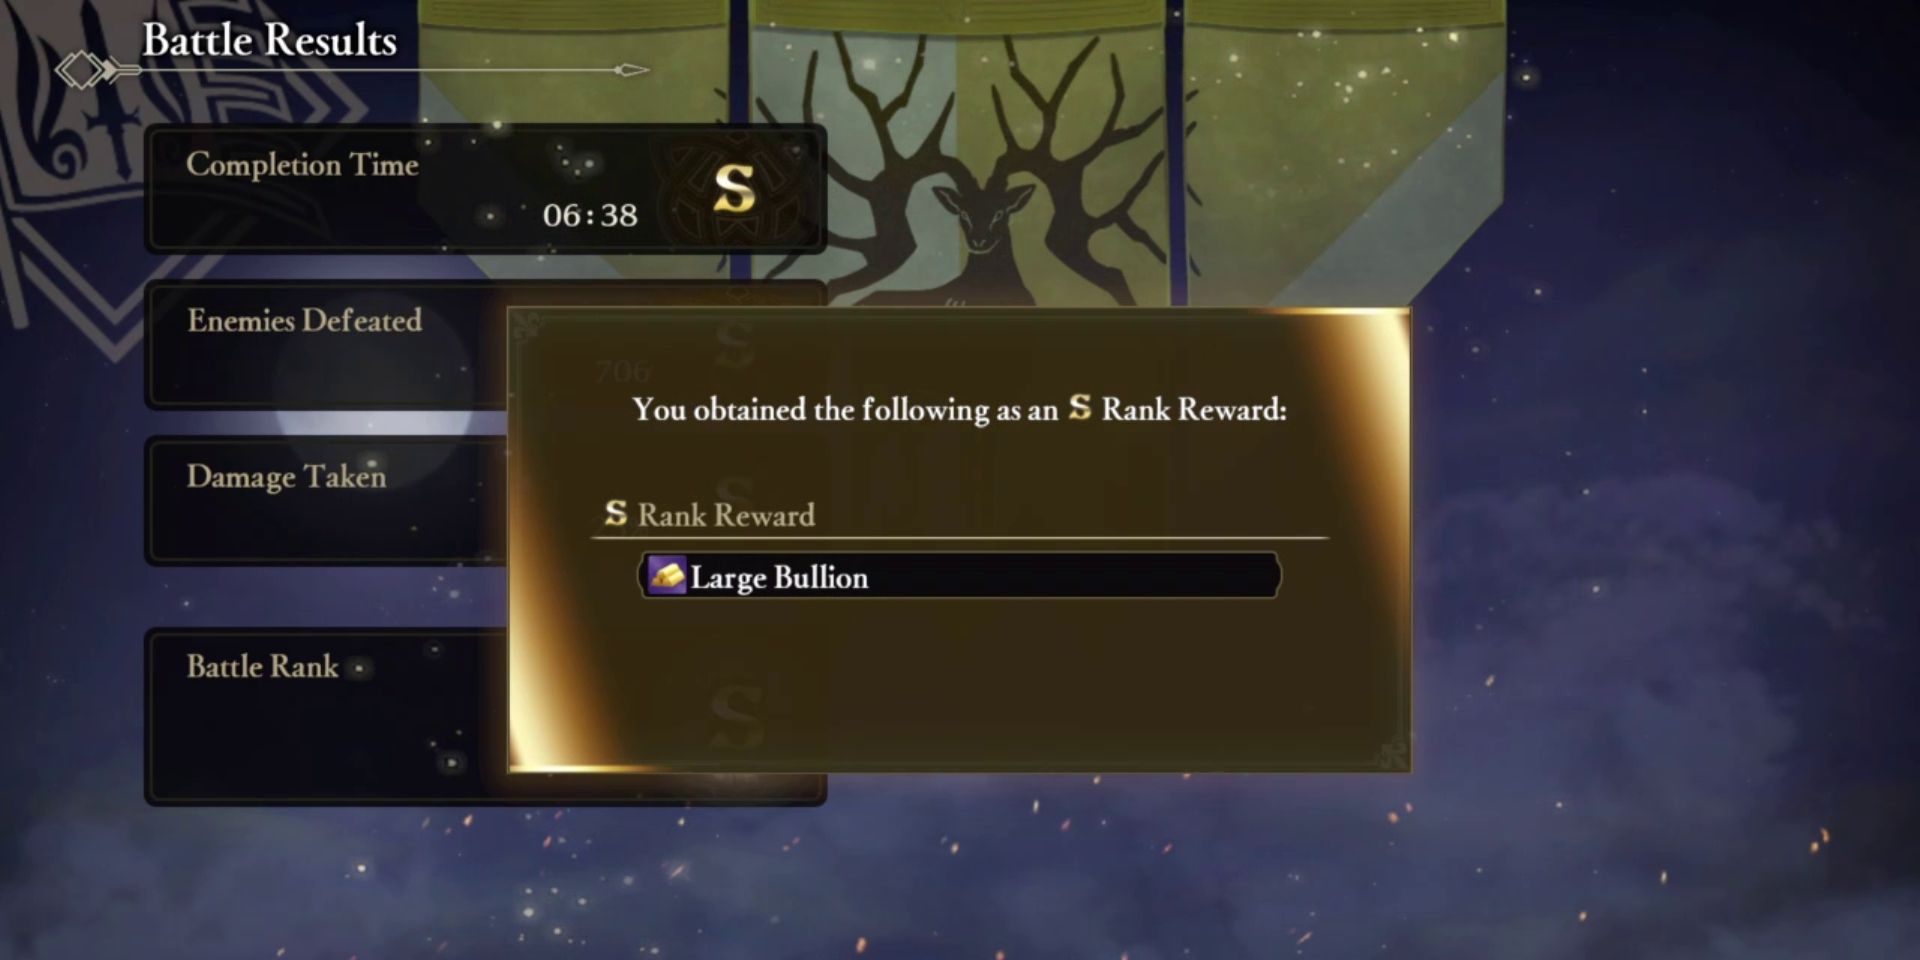 a battle result screen with a box in the middle that reads "you obtained the following as an S Rank Reward: Large Bullion." in the background is a yellow banner emblazoned with a stag with large, branching horns. on the left side are the battle results, which are partially covered by the box in the middle of the screen